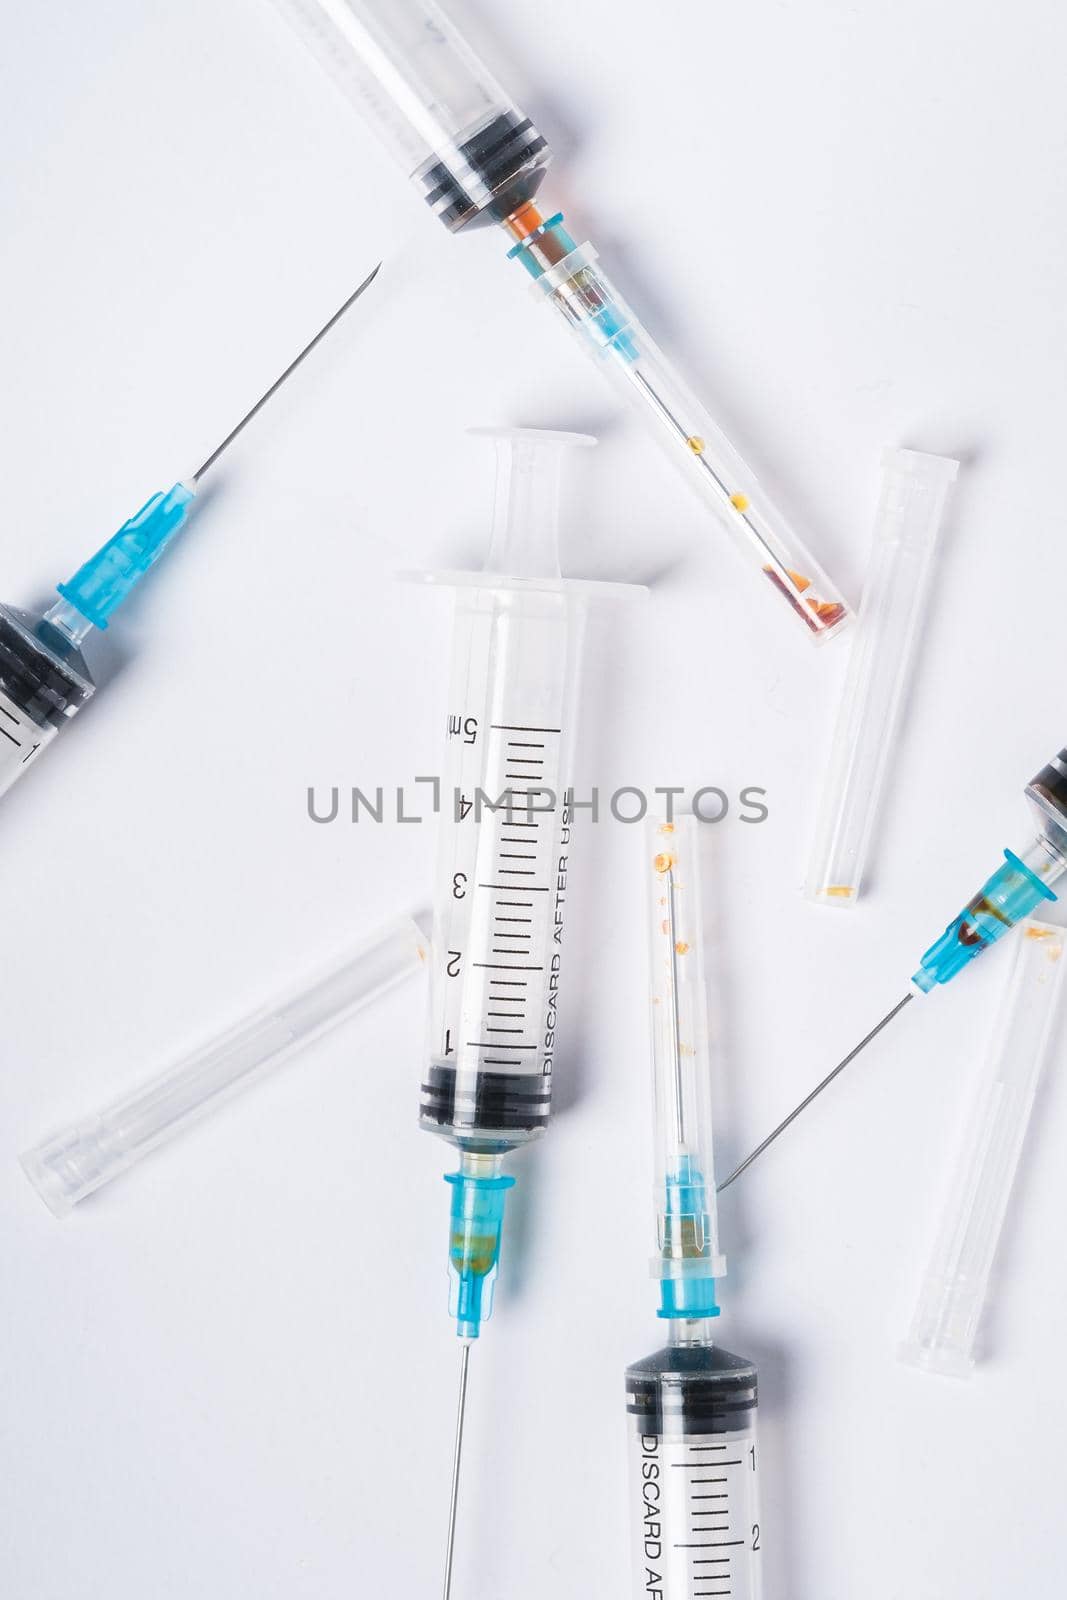 Dirty used plastic syringes, isolated by Frostroomhead